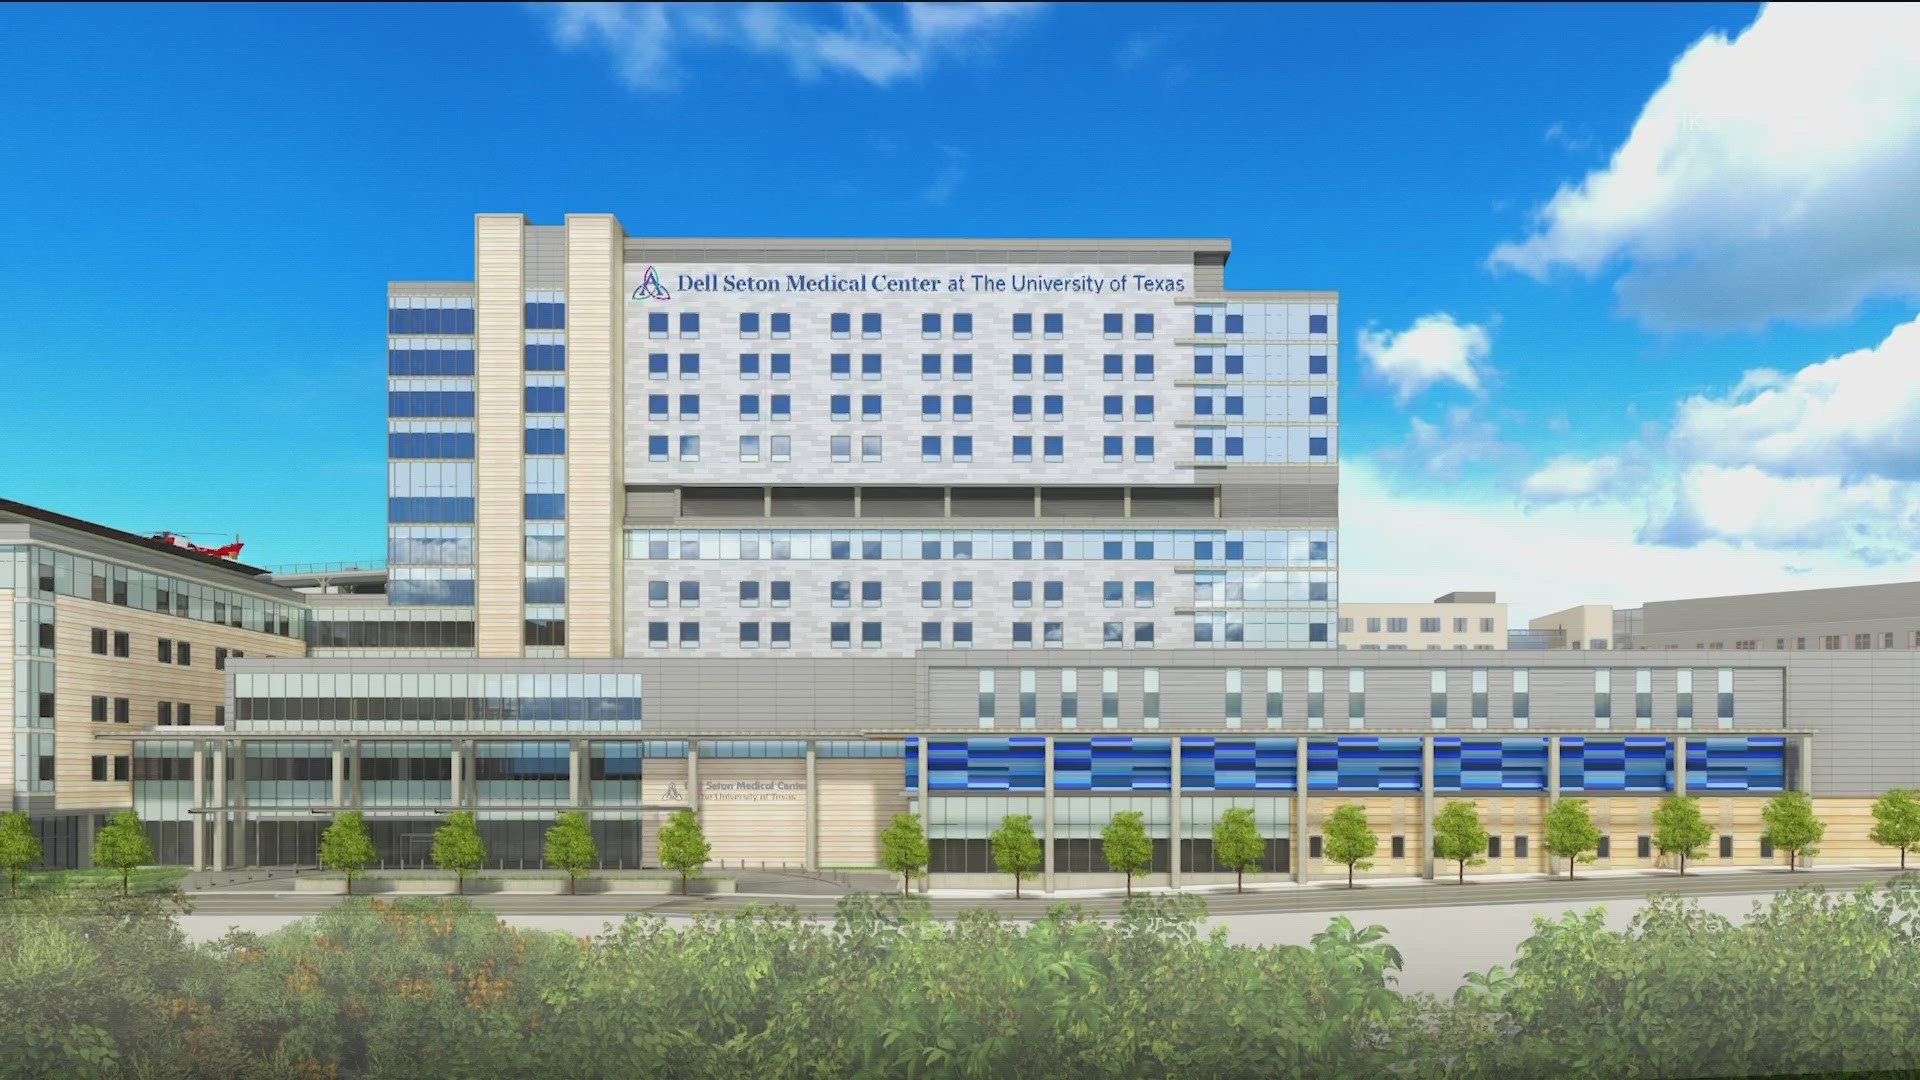 Hospitals are expanding to meet the population demand. Leaders of Ascension Seton just announced a $280 million project to expand Dell Seton Medical Center at UT.